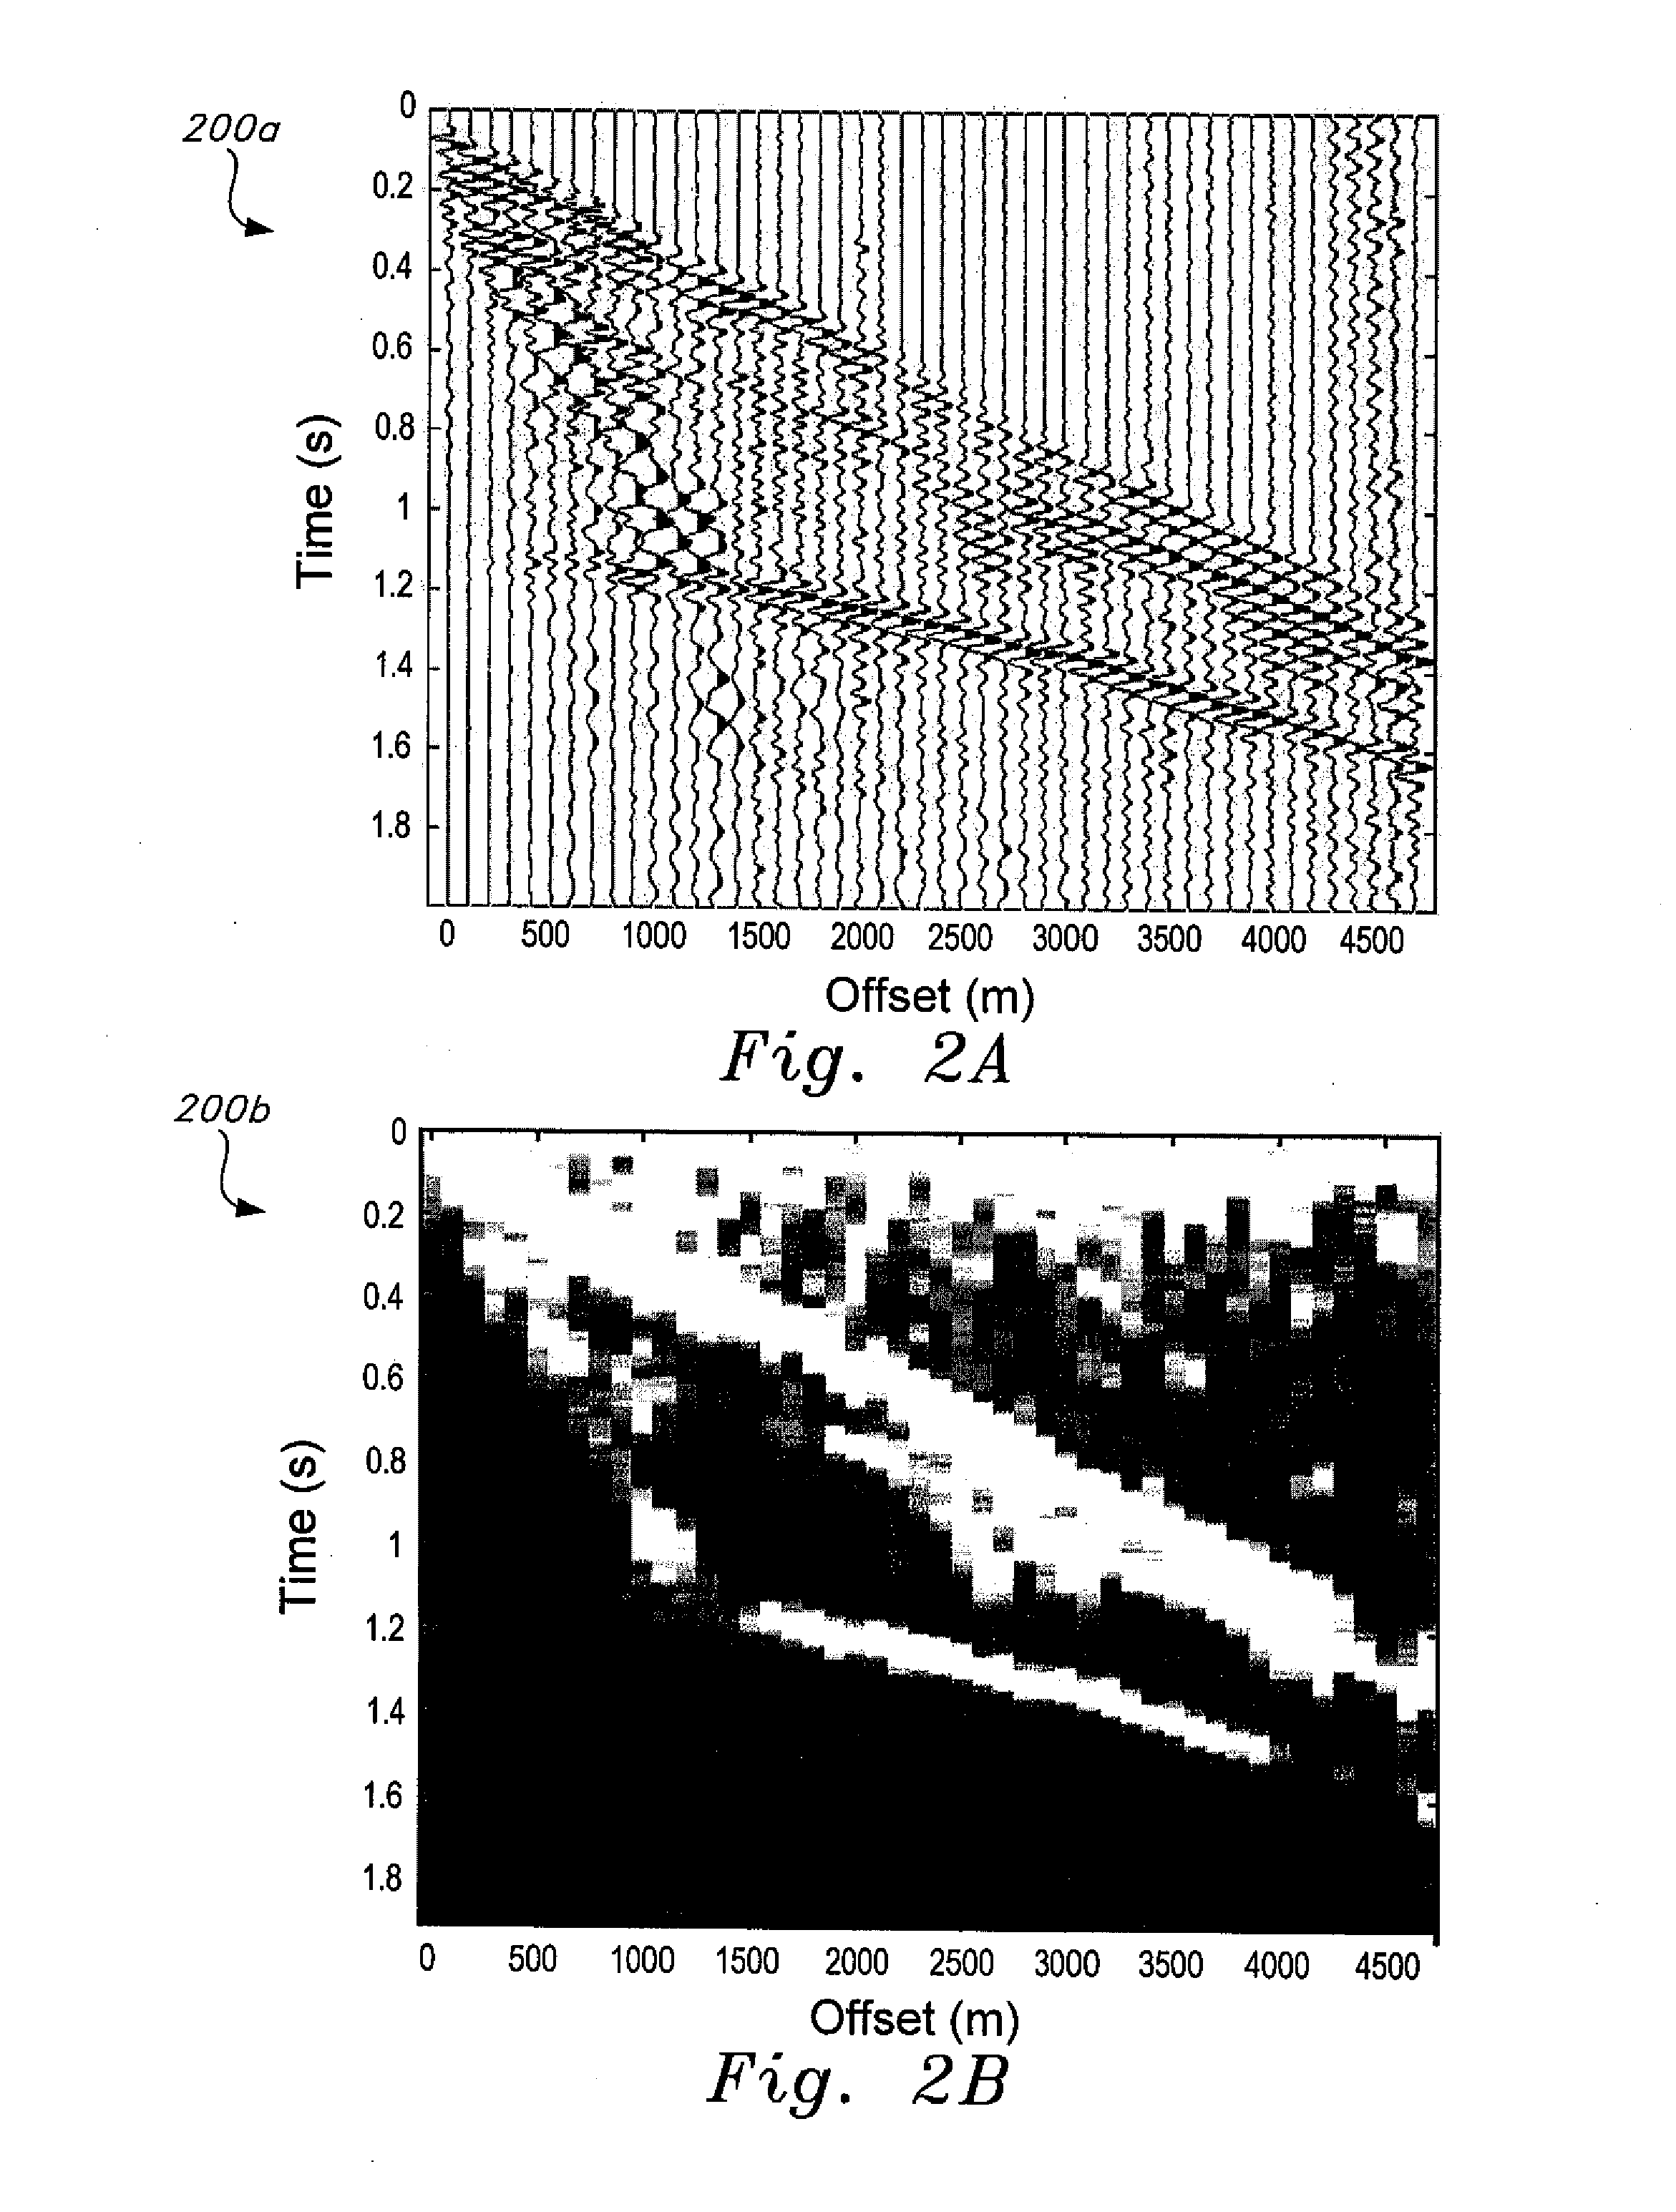 Method of first arrival picking of seismic refraction data